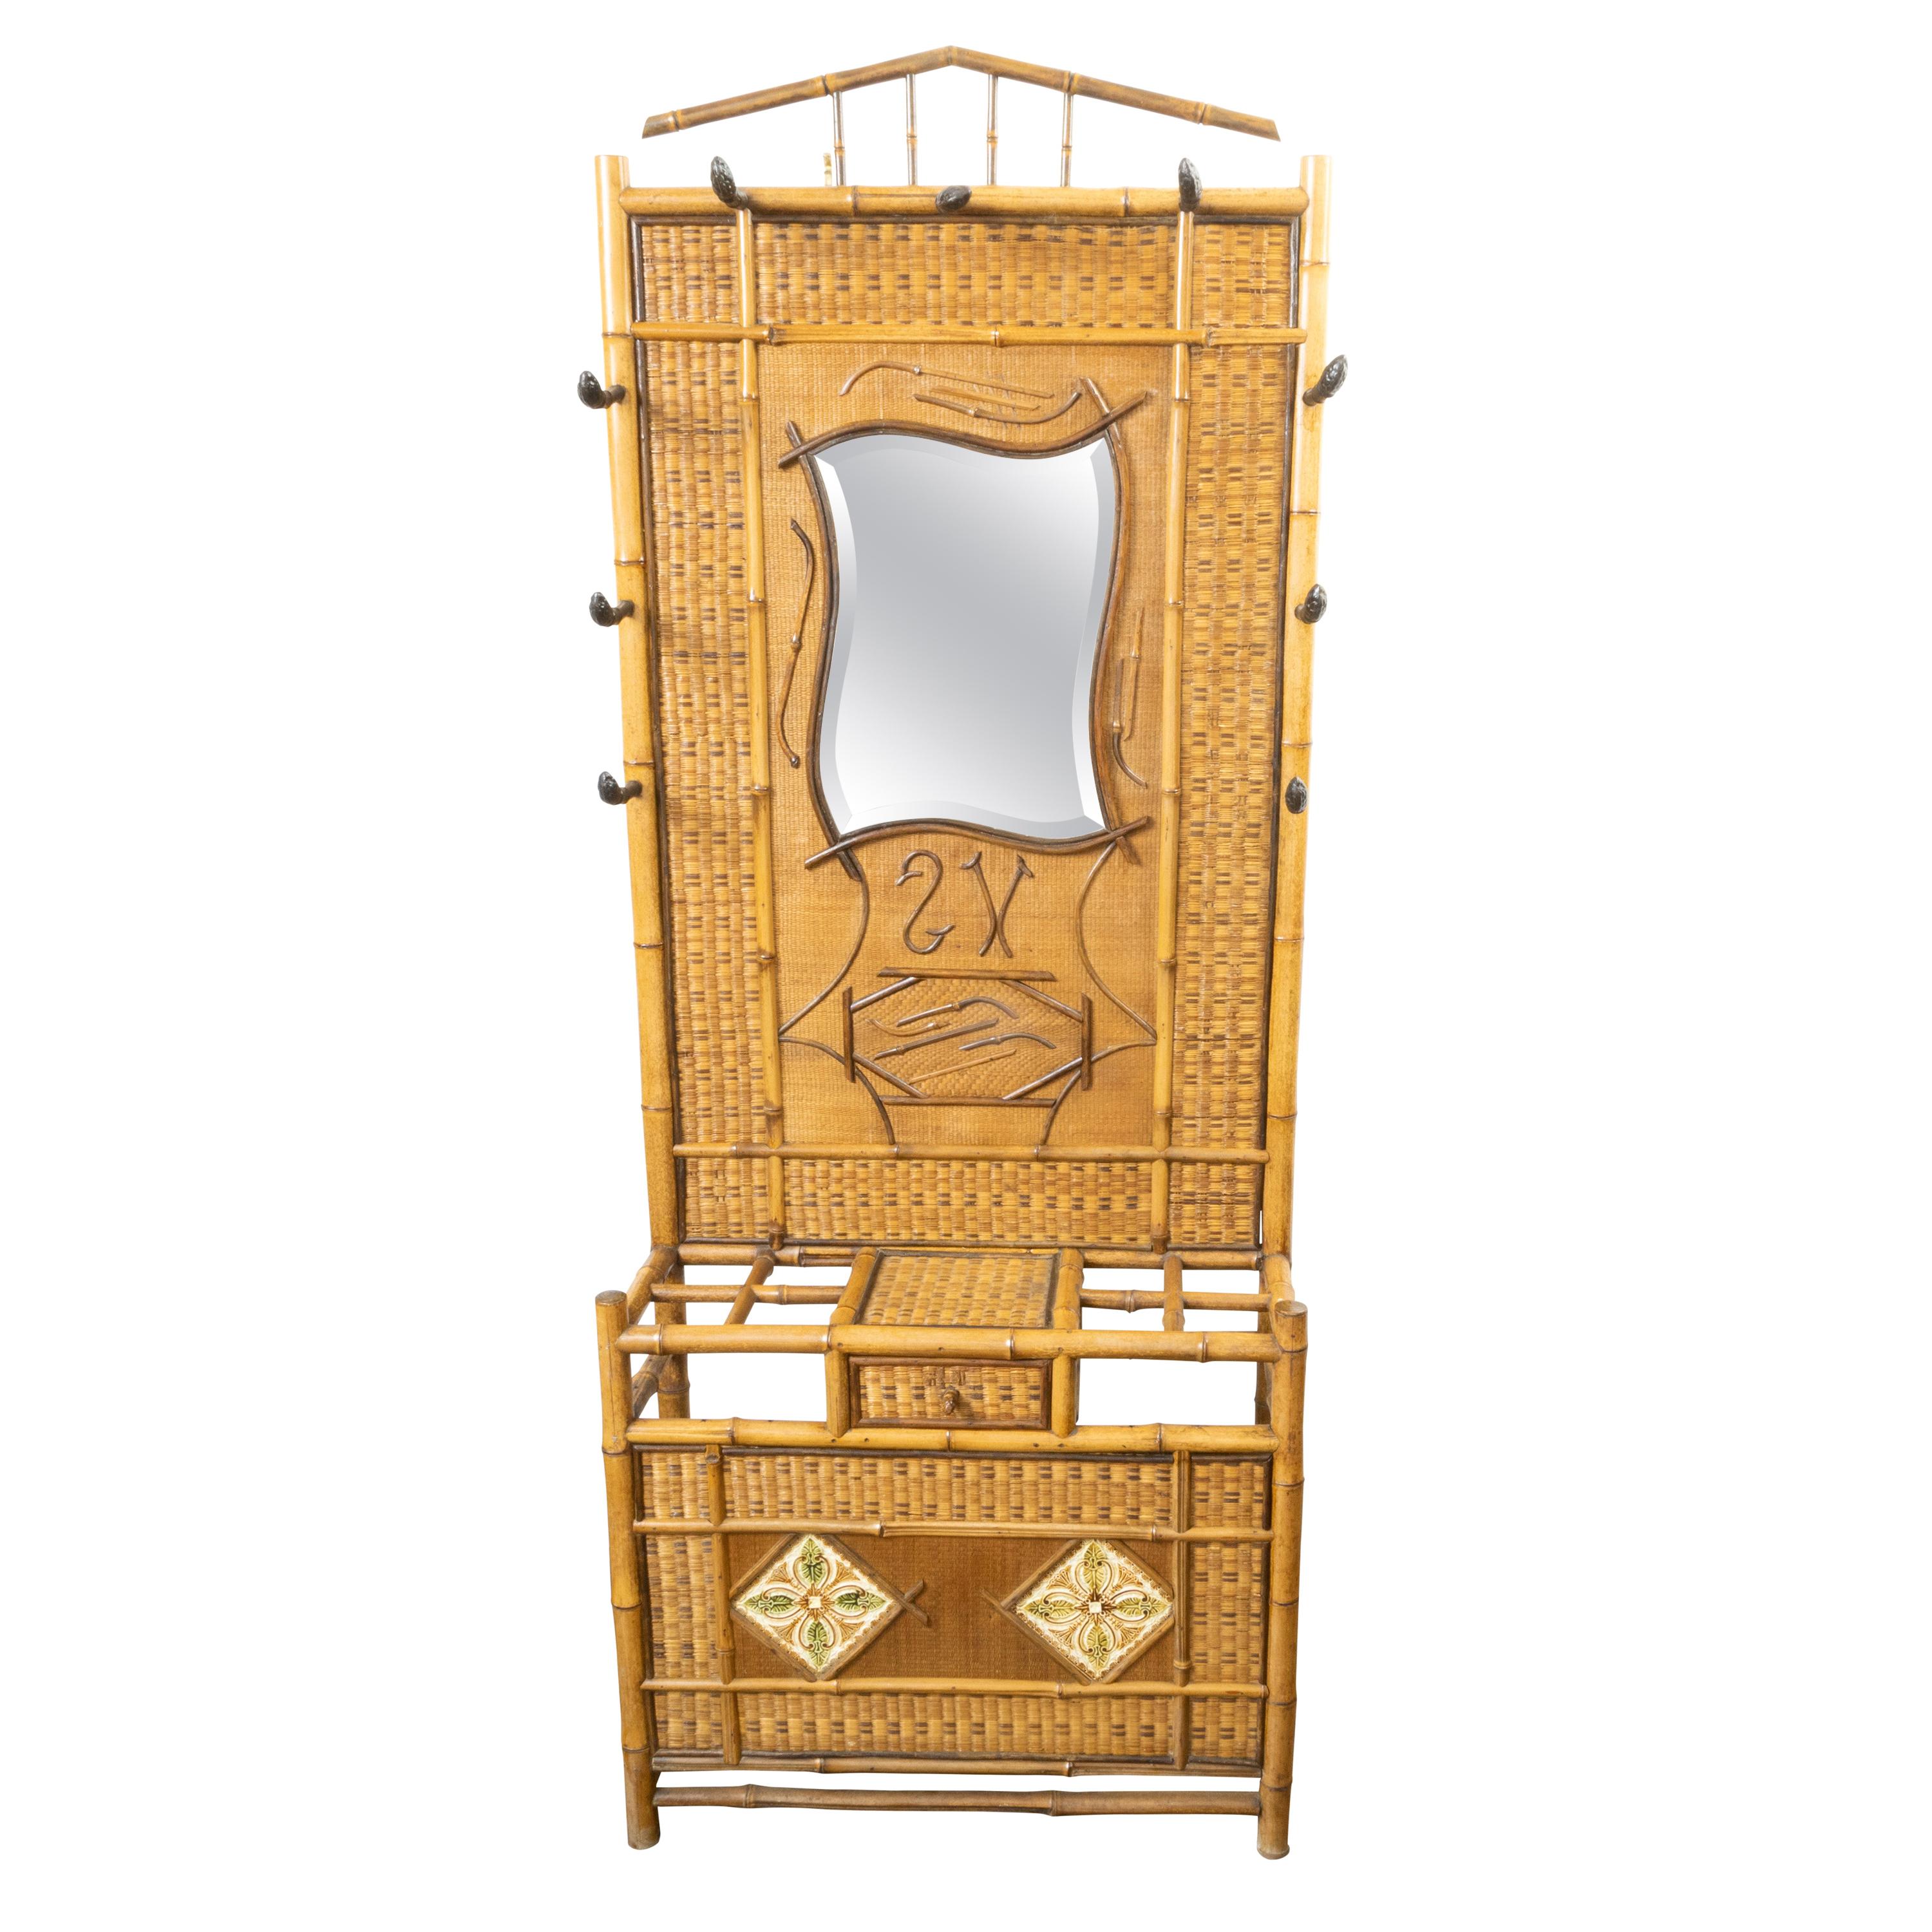 English 1880s Freestanding Bamboo and Rattan Hat Rack with Mirror and Tiles For Sale